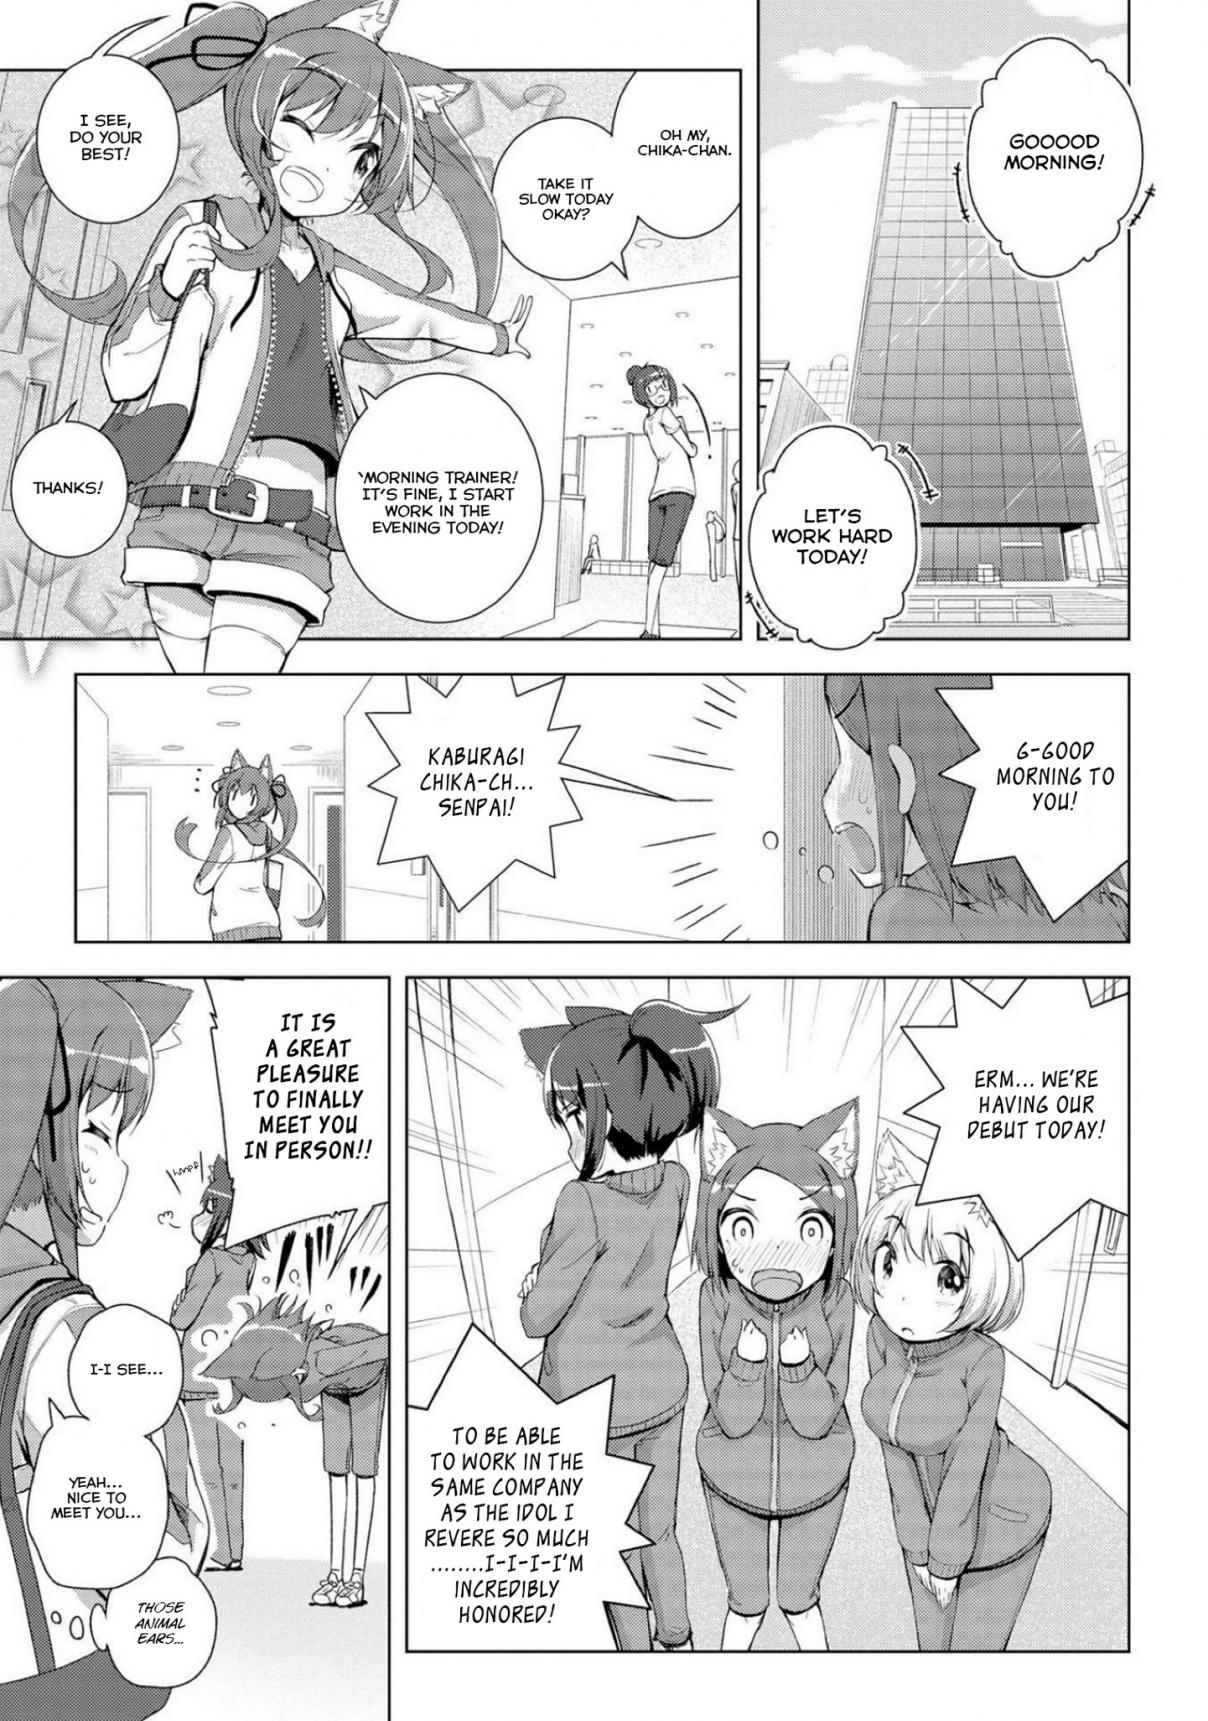 Mimi Mix! Vol. 3 Ch. 16 This tail is full of love